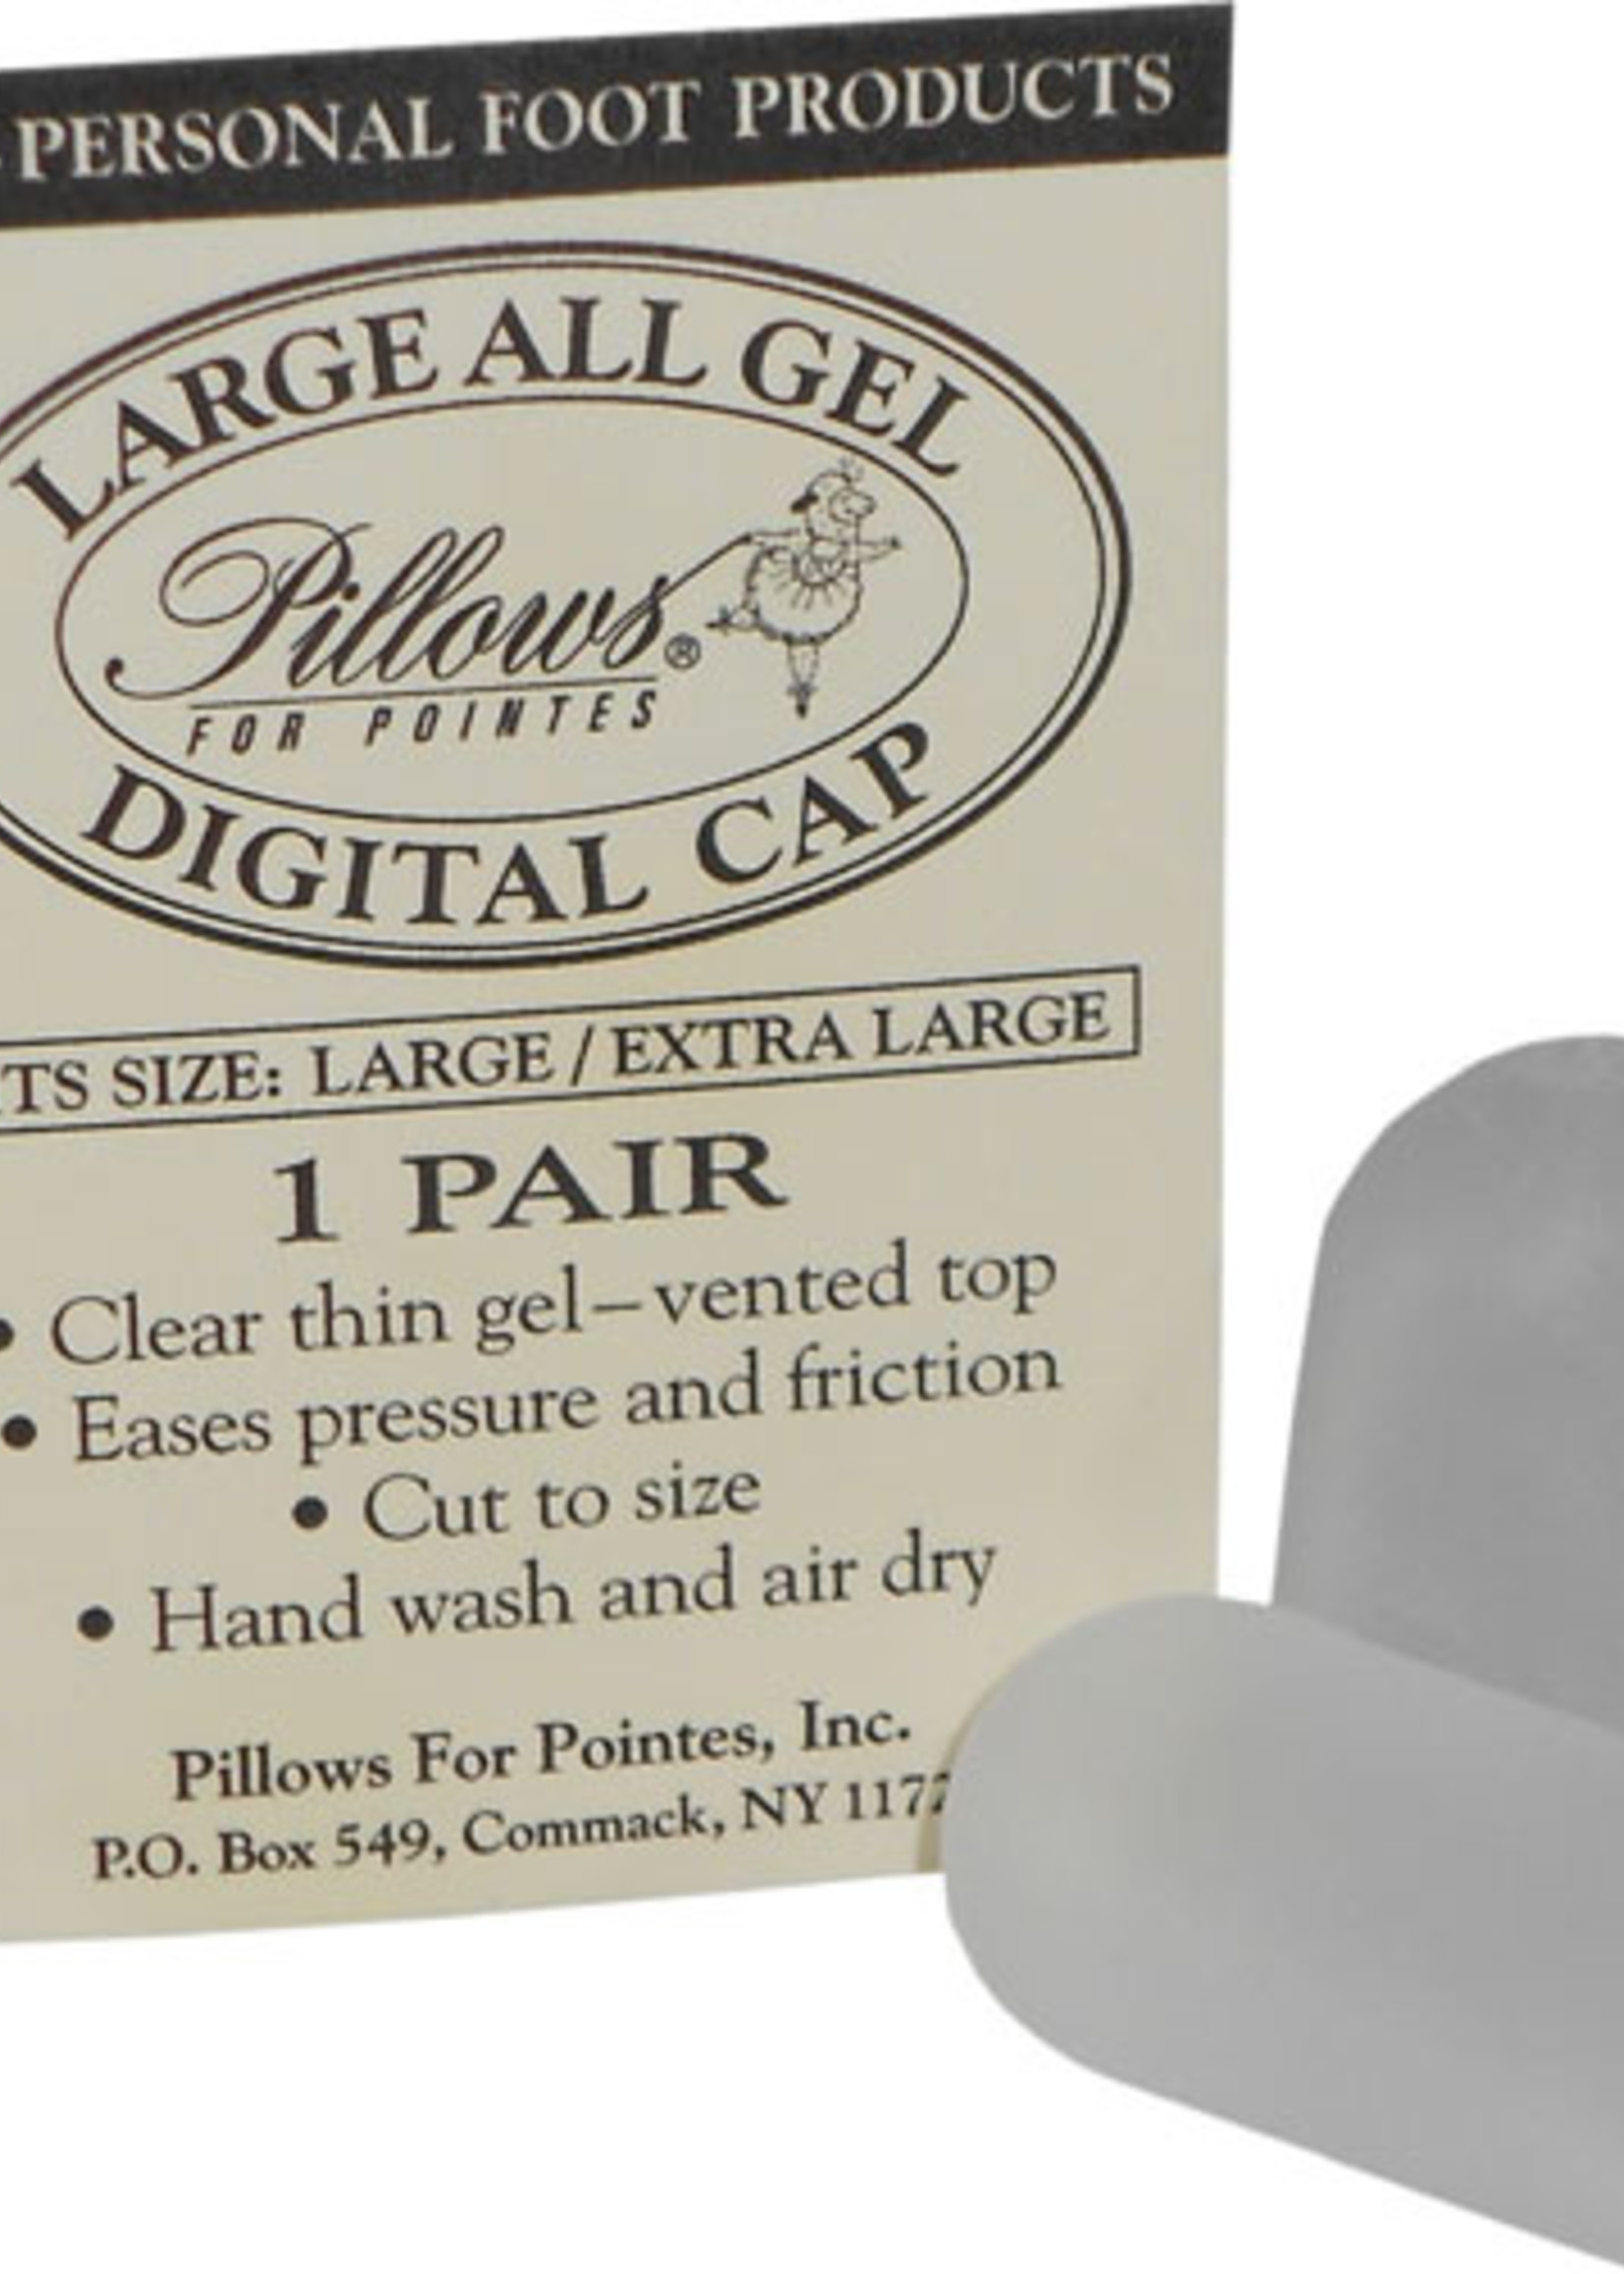 Pillows for Pointes Large All Gel Digital Big Toe Cap